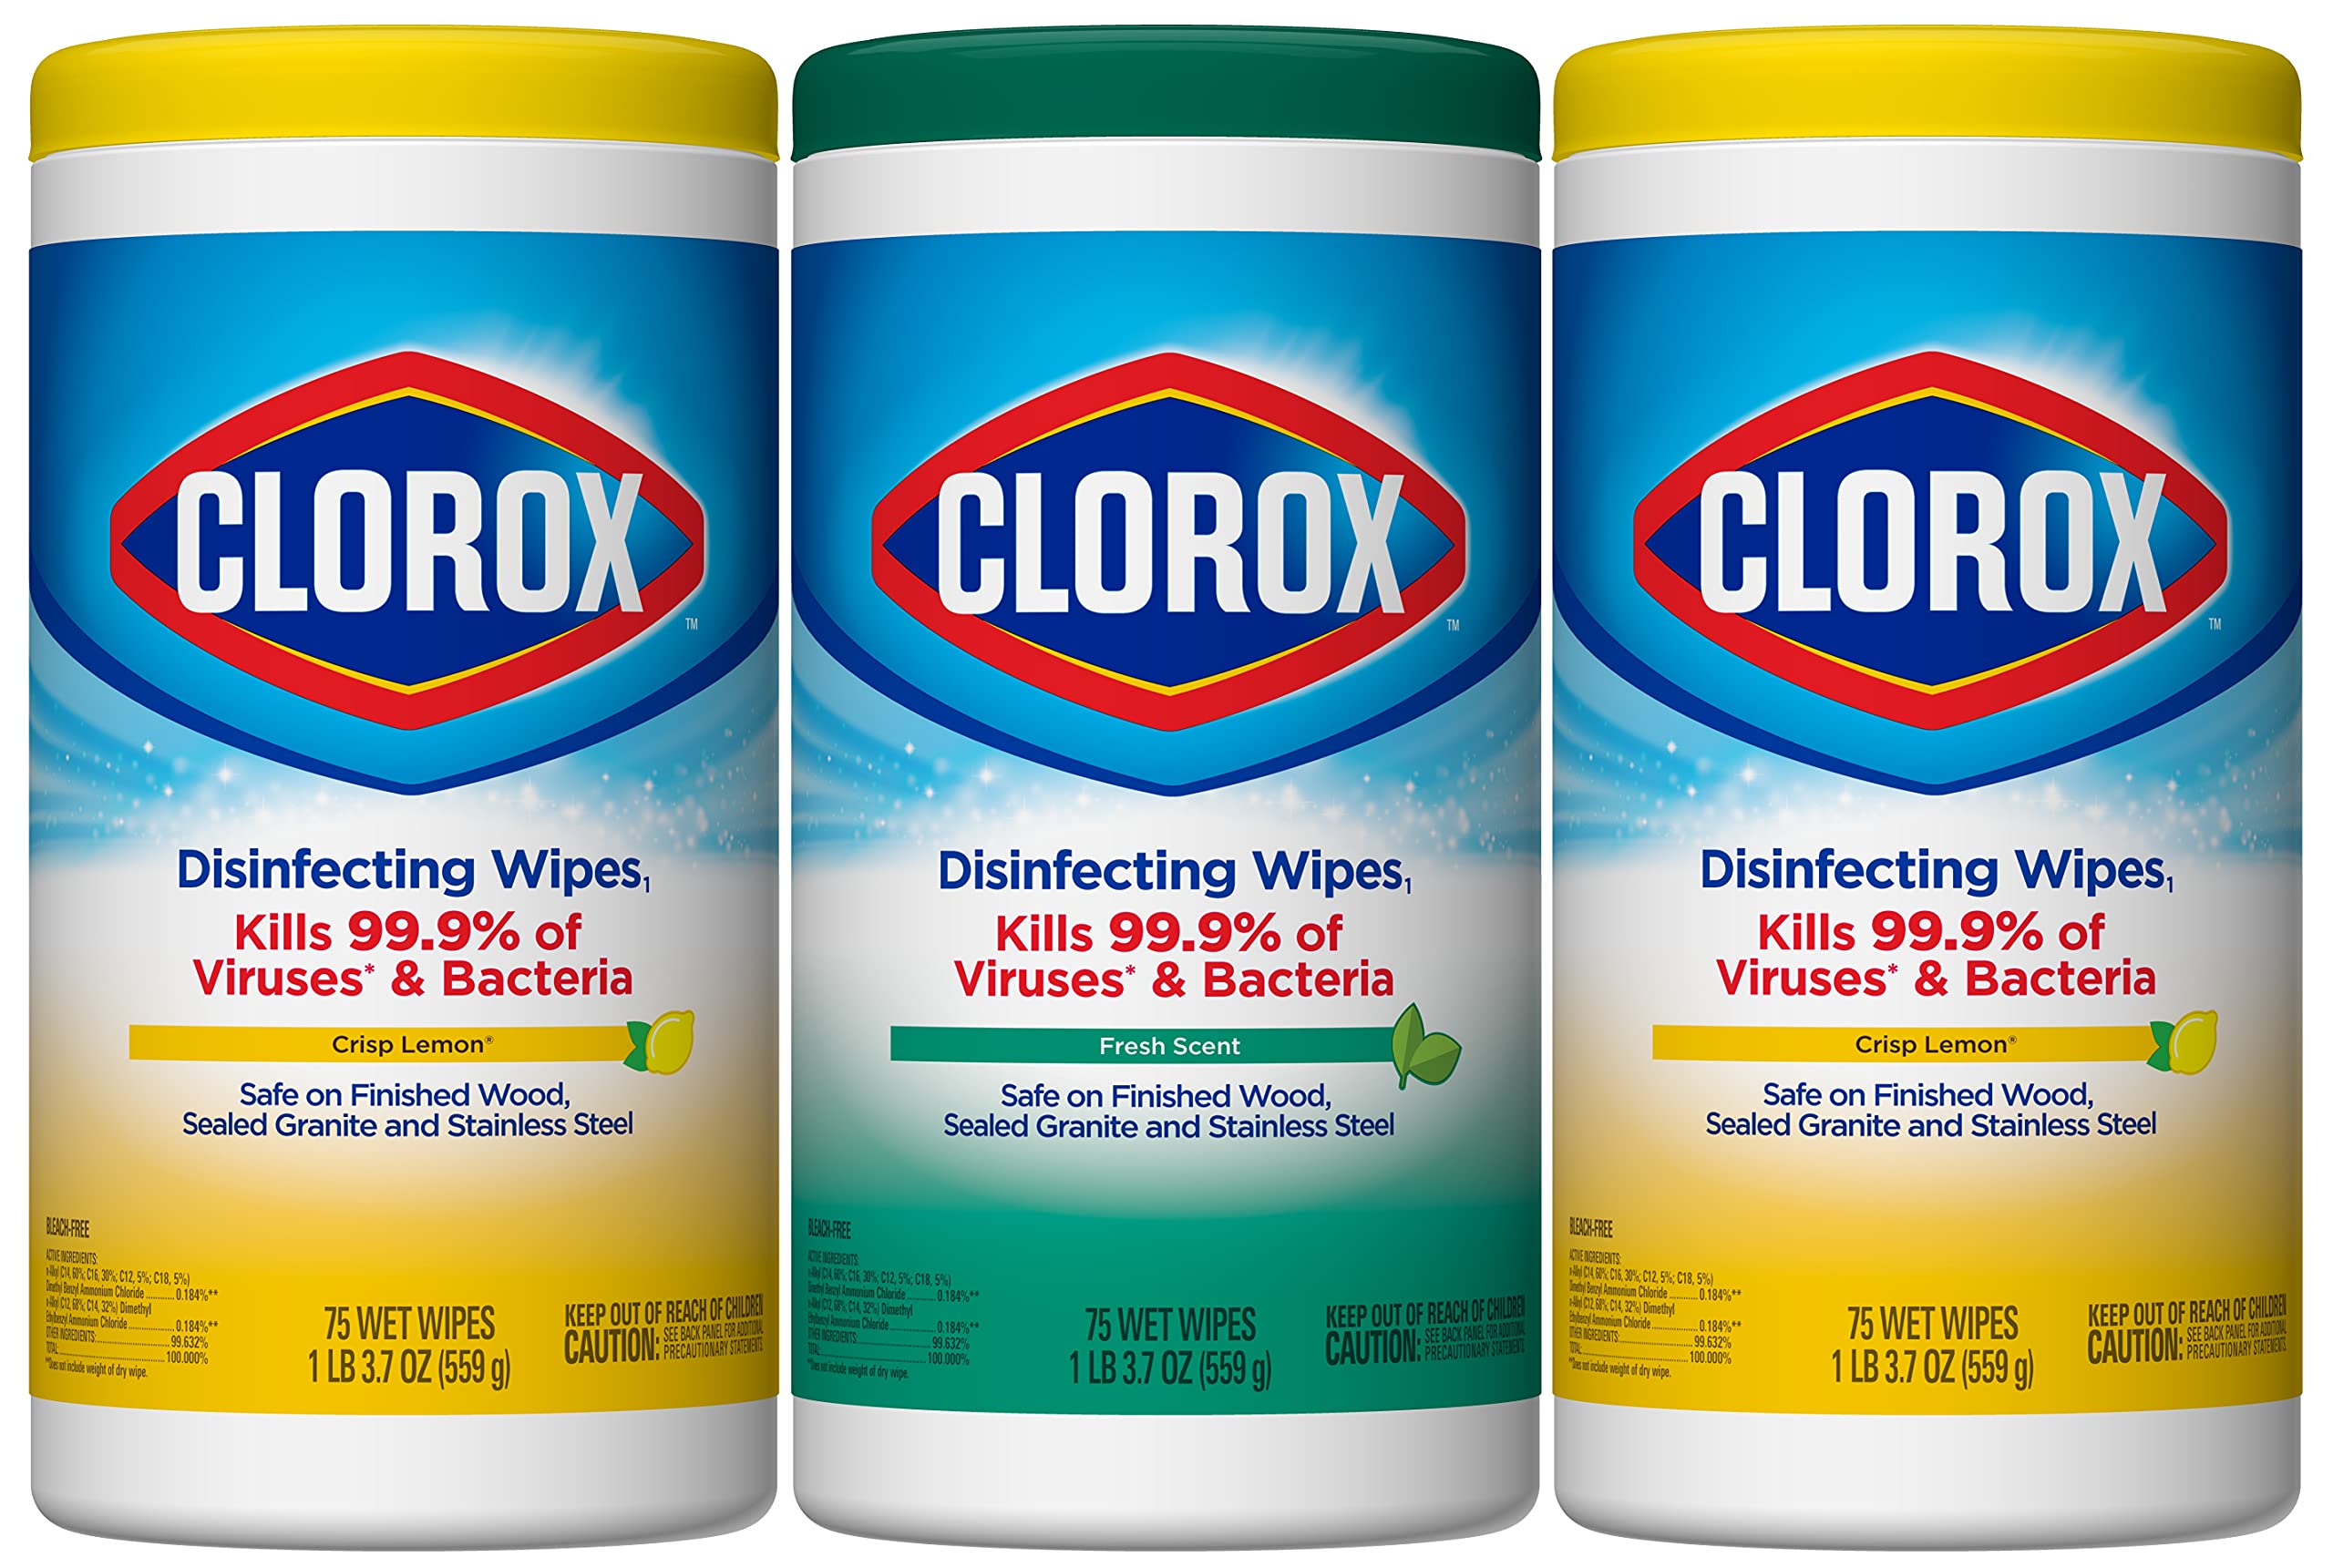 Clorox Disinfecting Wipes, Bleach Free Cleaning Wipes, Multi-surface Wipes, Fresh Scent & Crisp Lemon Value Pack, 75 Wipes (Pack of 3) - Packaging May Vary